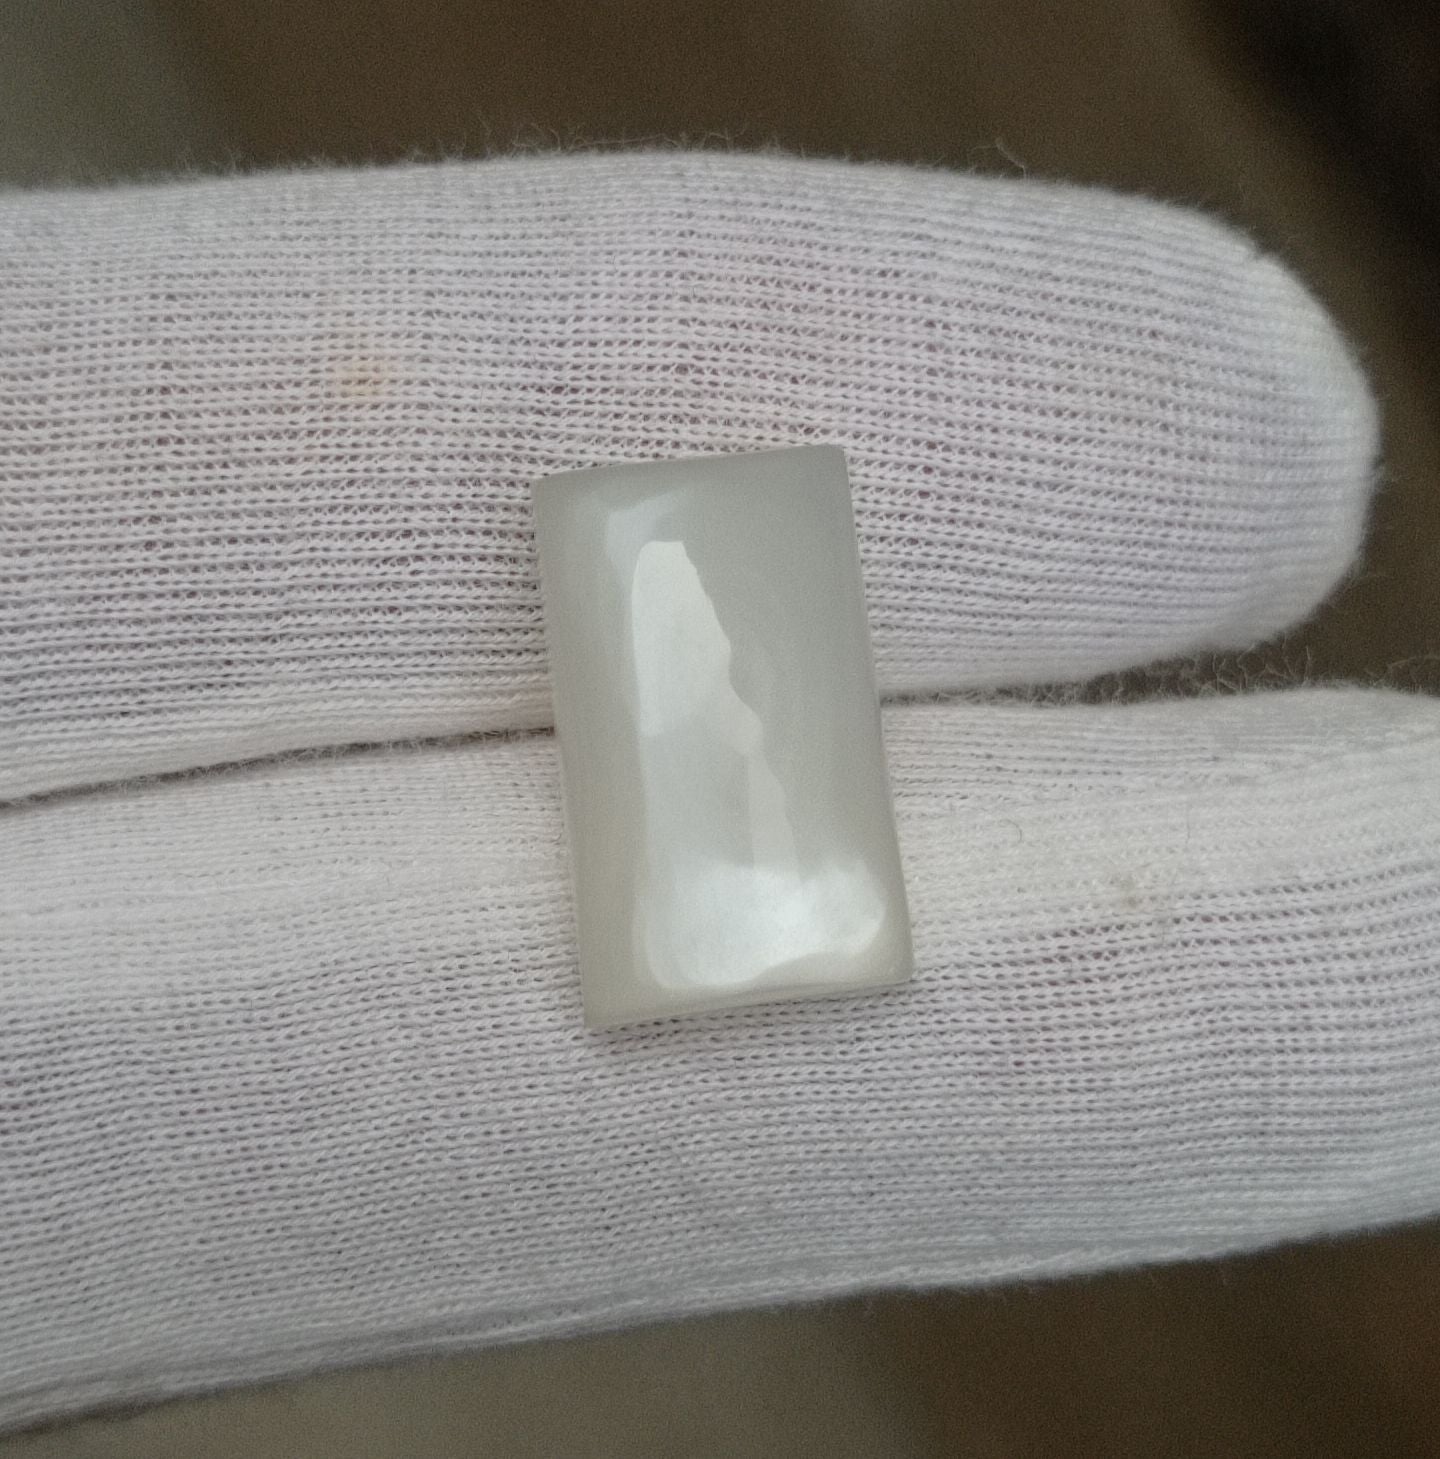 10.9ct Milky Moonstone with White Sheen - Adularia Moonstone - June Birthstone - 17.5x10x6mm